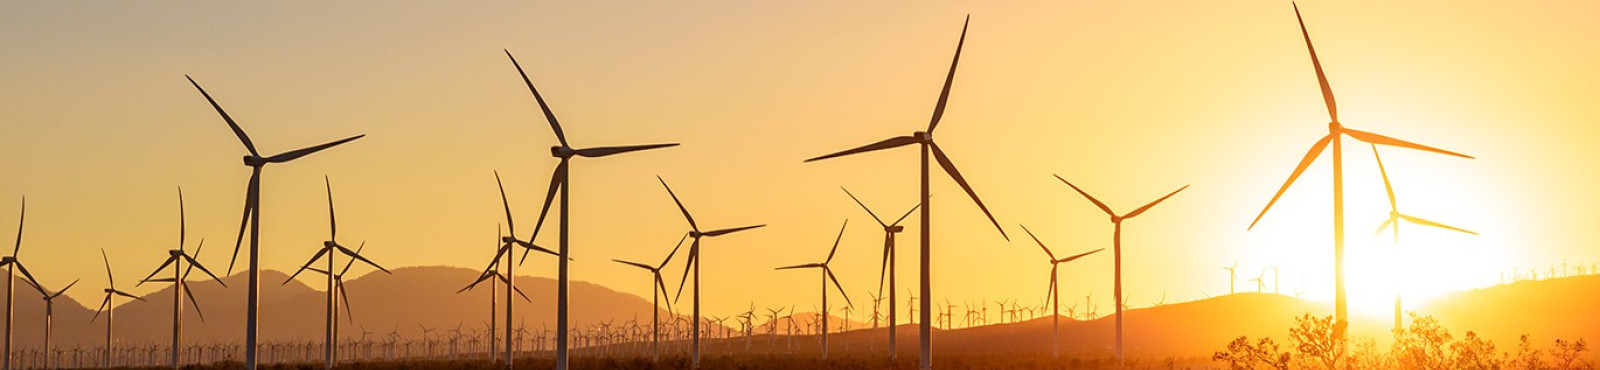 Valorem Chooses NRG to Support Wind Resource Assessment Activities in Africa